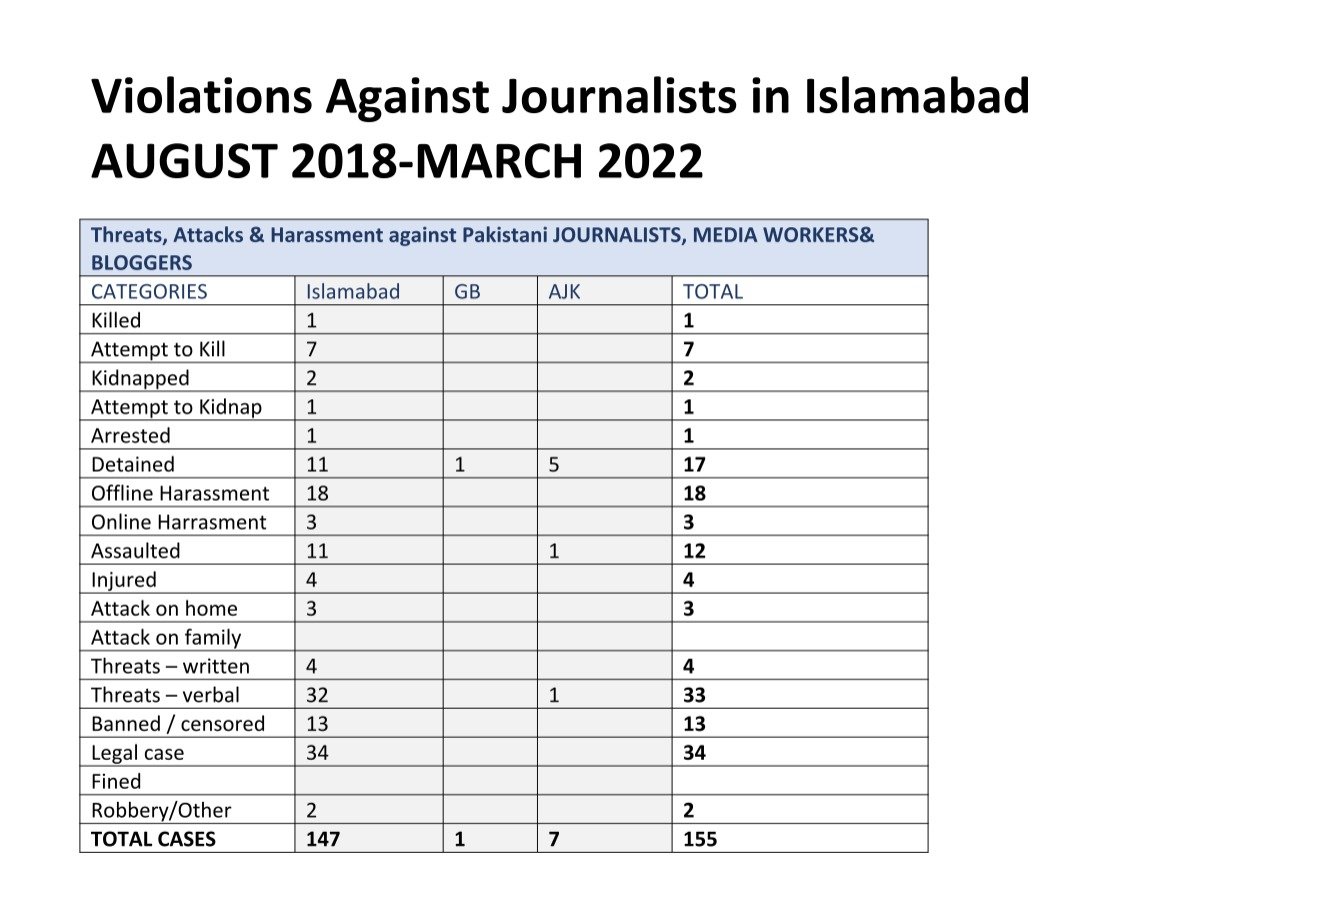 The data collected by The Freedom Network which shows the number of journalists threatened, arrested and harassed during PTI’s tenure.